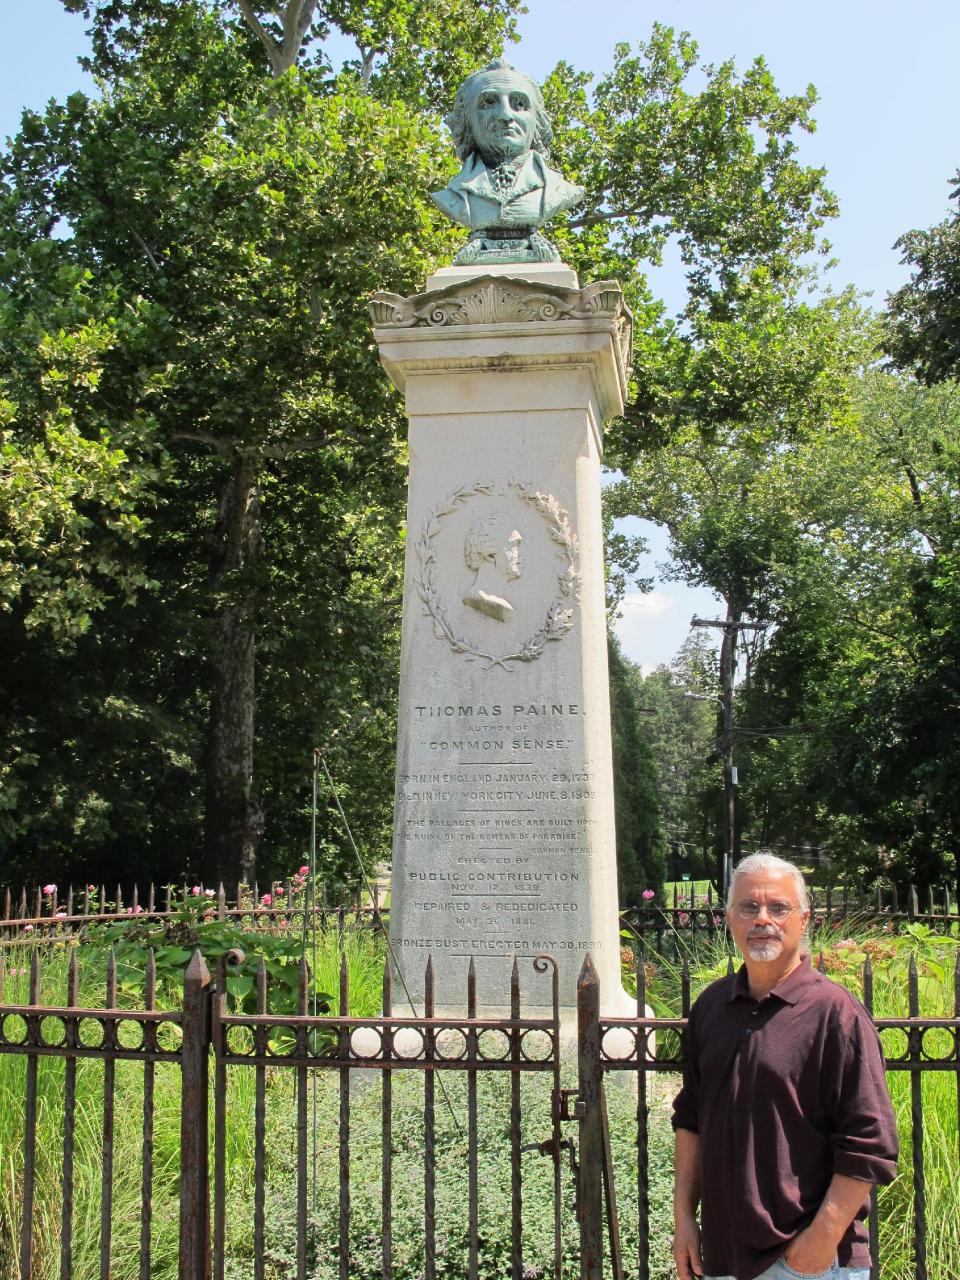 In this Tuesday, Aug. 20, 2013 photo, Gary Berton, former president of the Thomas Paine National Historical Association, stands next to a Paine monument in New Rochelle, N.Y. The association's once-endangered collection of about 300 Paine-related pieces is the cornerstone of a new Institute for Thomas Paine Studies at Iona College. (AP Photo/Jim Fitzgerald)